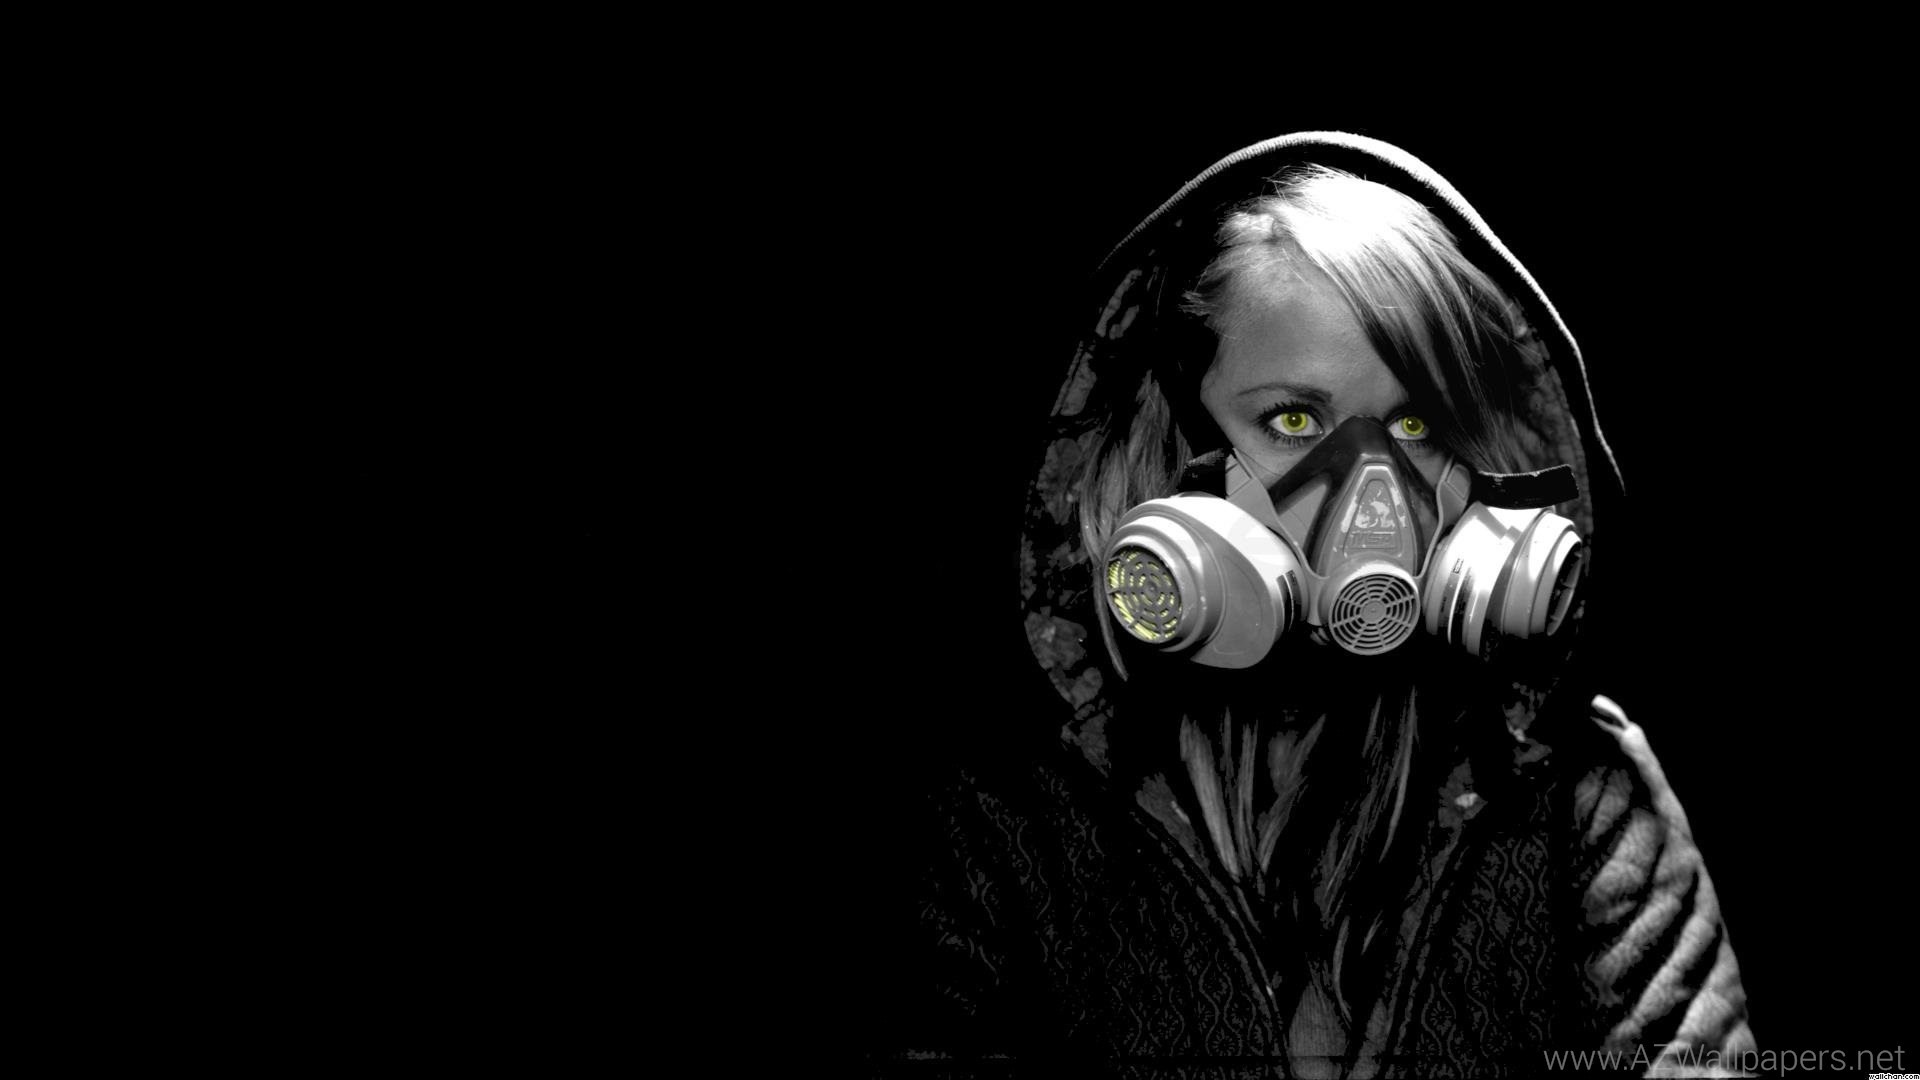 1920x1080 Gas Mask wallpapers Gas Mask stock photos